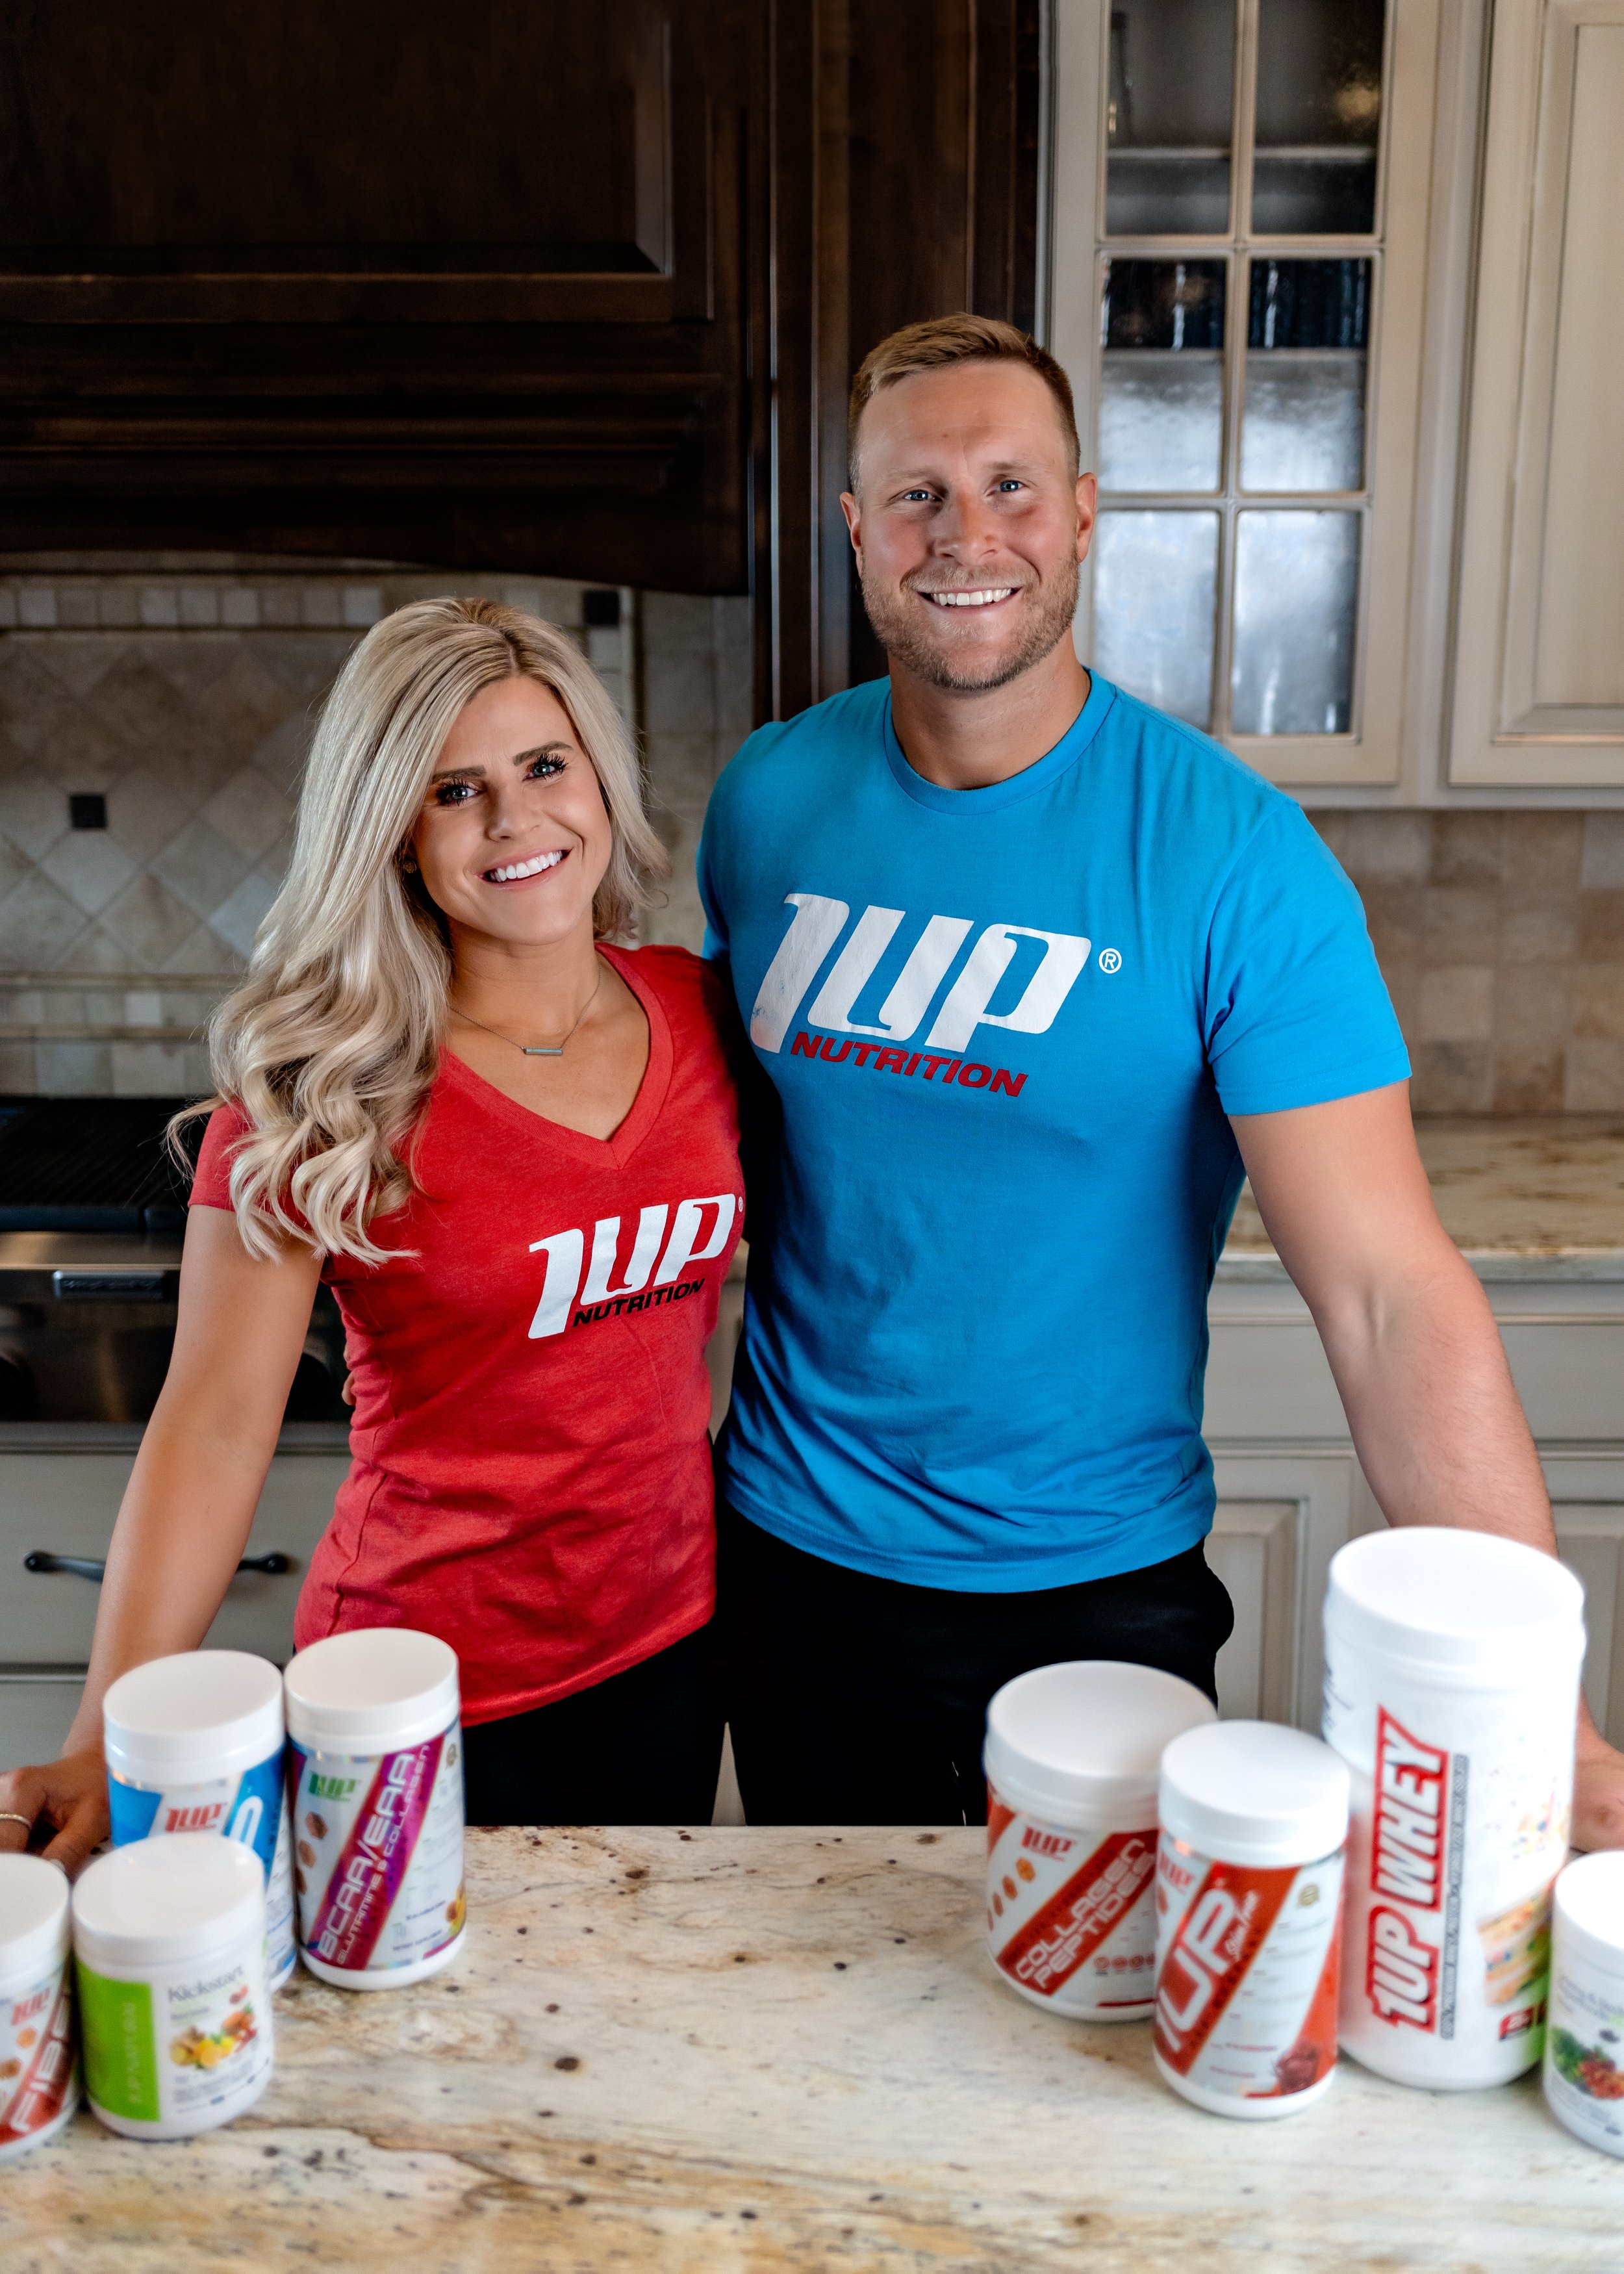 1up Nutrition Mega Strong Fitness